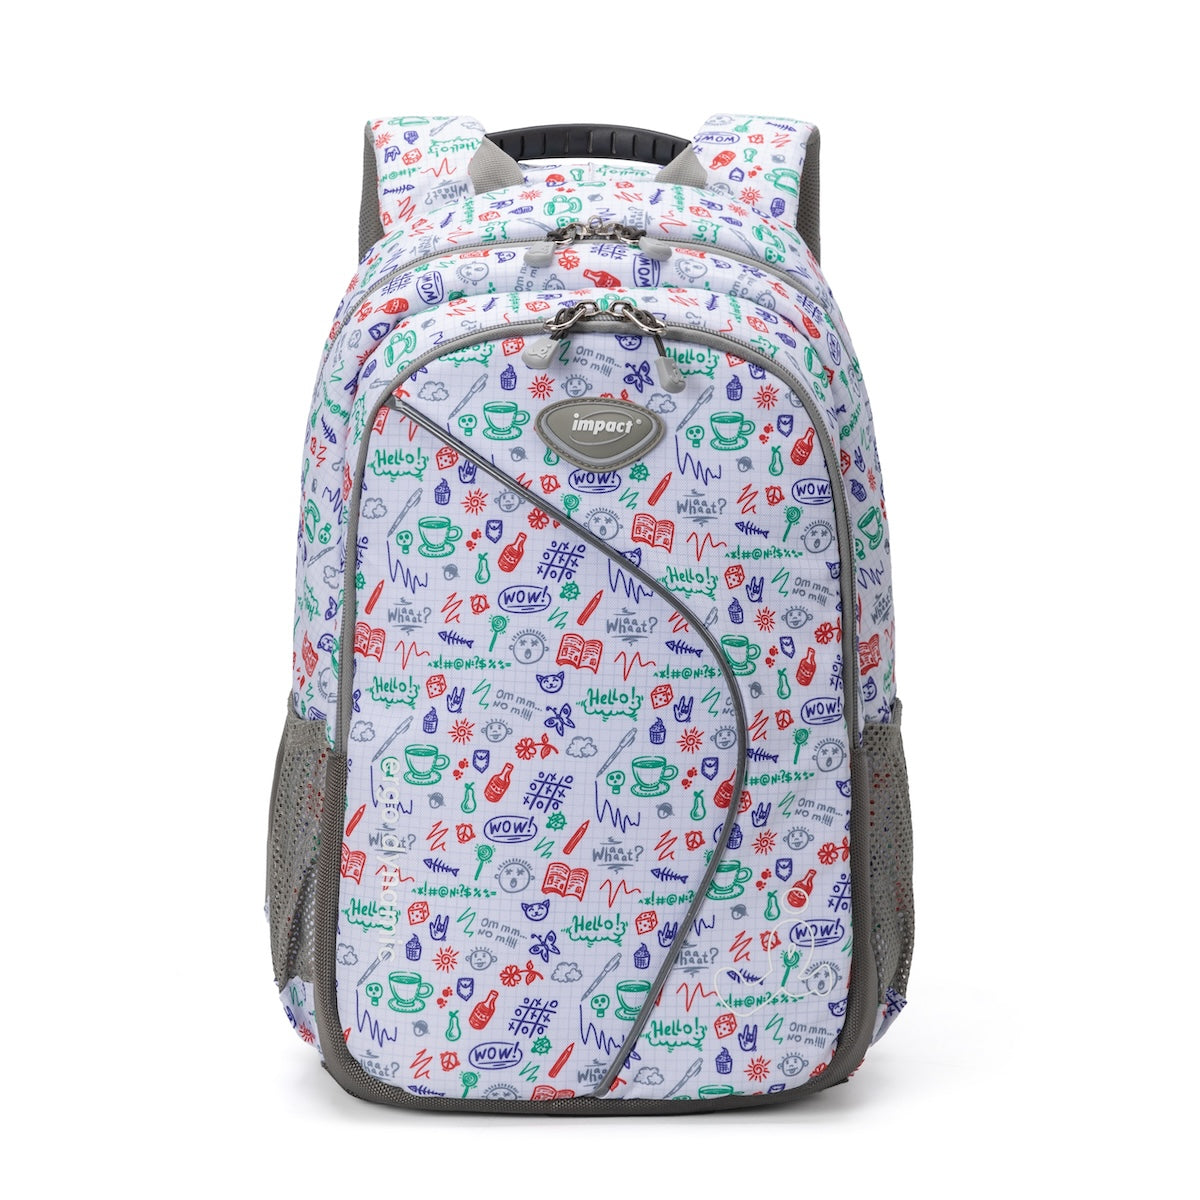 Impact School Bag IPEG-158 - Ergo-Comfort Spinal Support Primary Secondary School Backpack (Special Editions)